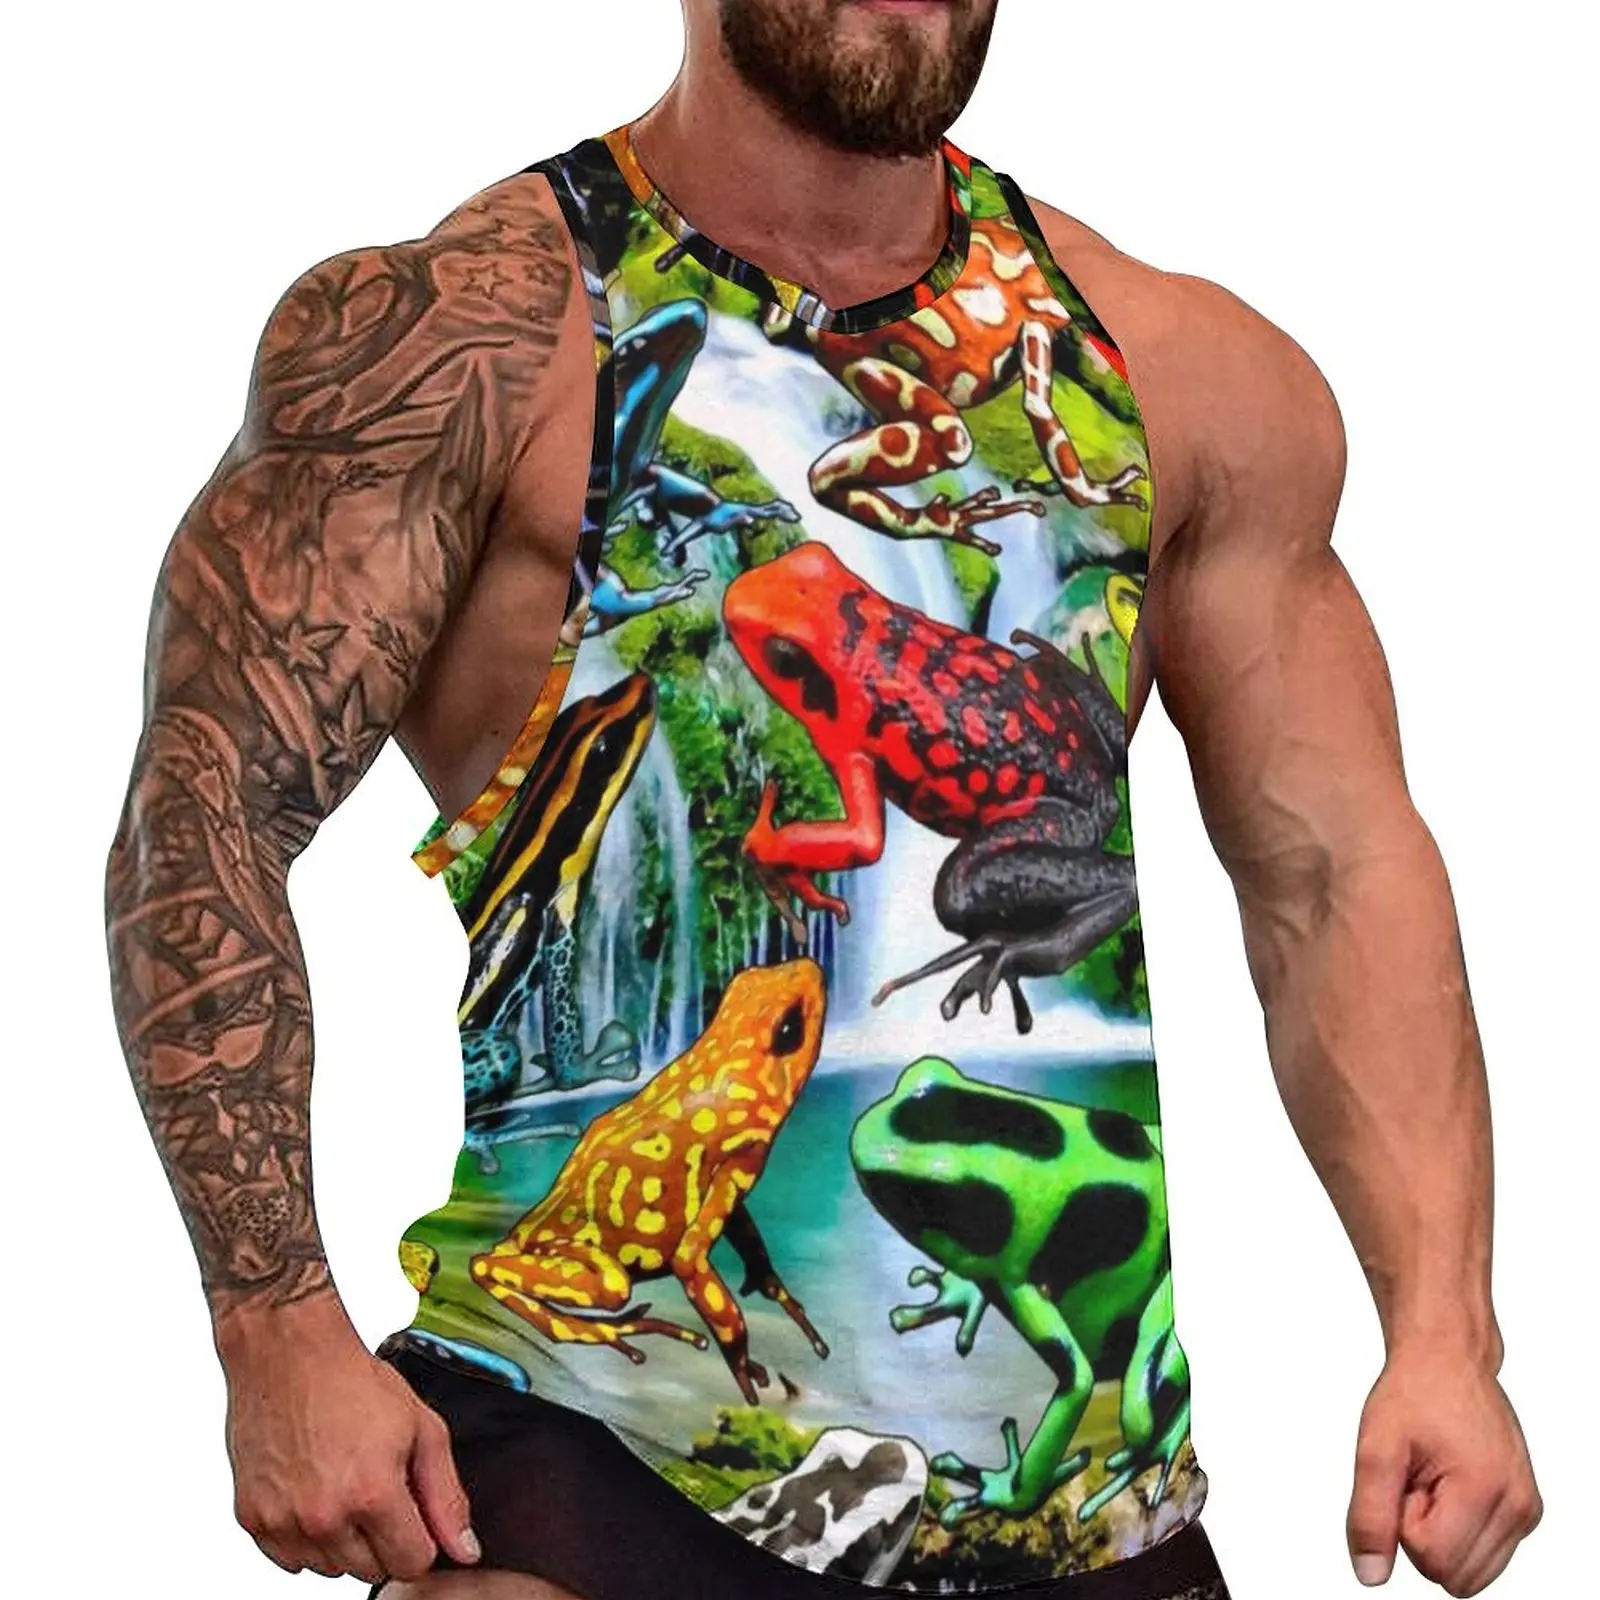 

Rainforest Frog Tank Top Male Colorful Poison Frogs Tops Summer Graphic Bodybuilding Fashion Oversized Sleeveless Shirts